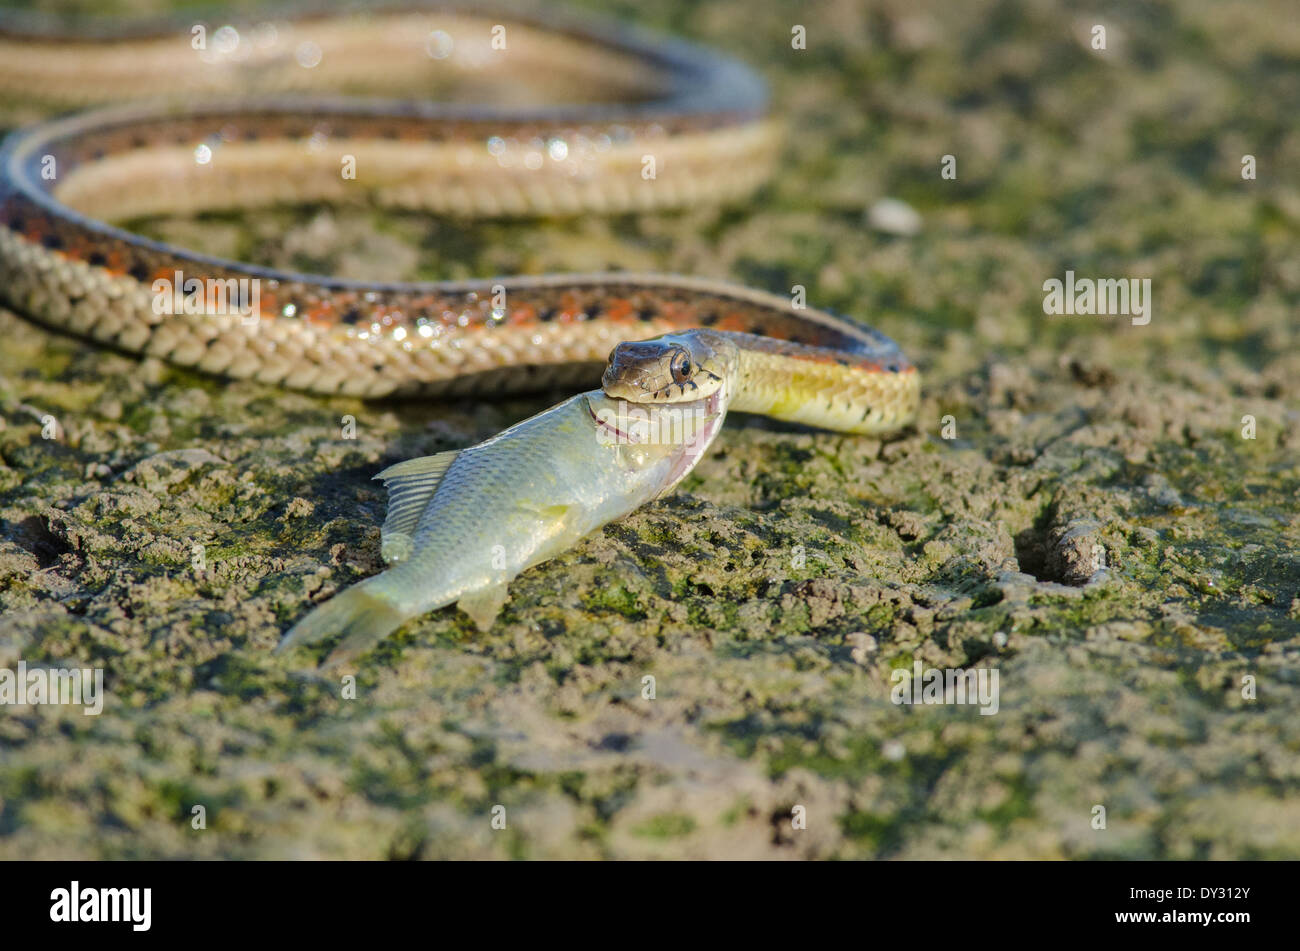 New Mexico Garter Snake, (Thamnophis sirtalis dorsalis), hunting fish in a drying marsh at Bosque del Apache NWR, New Mexico. Stock Photo